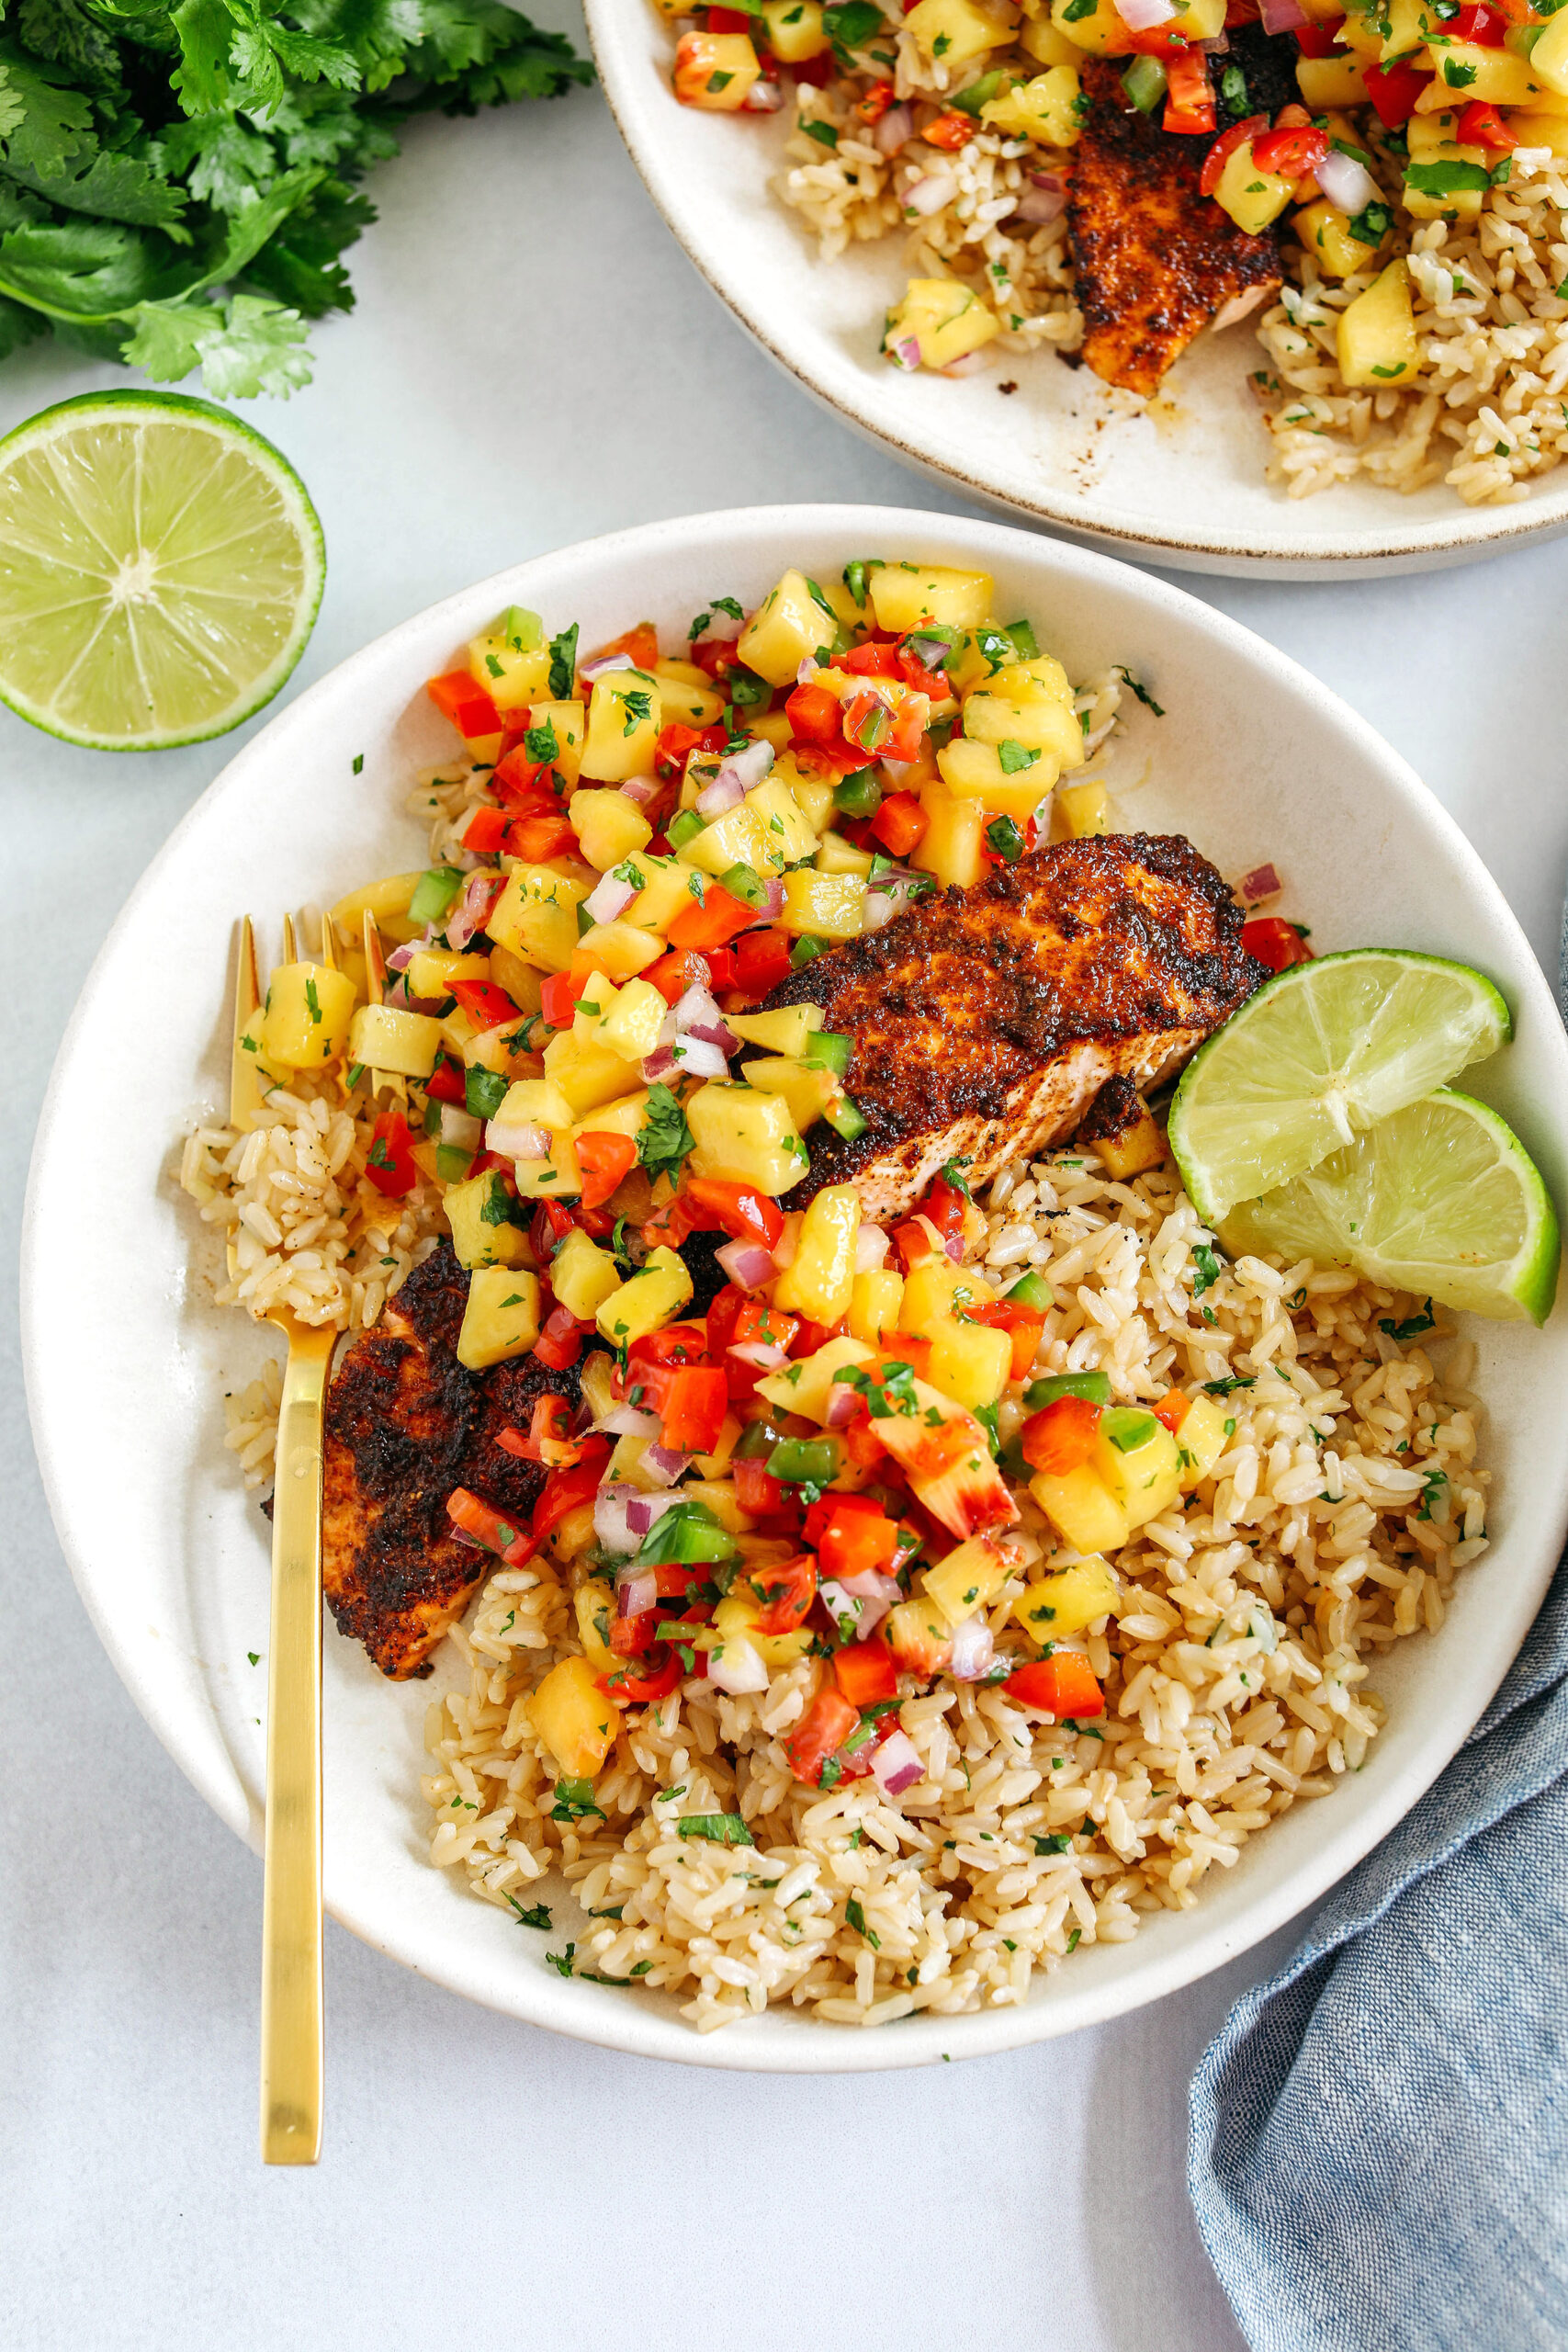 This tender flaky Chili Lime Salmon is coated in a delicious combination of spices and fresh lime juice for a mouthful of flavor!  Pair it with fresh mango salsa and brown rice for the perfect healthy dinner!